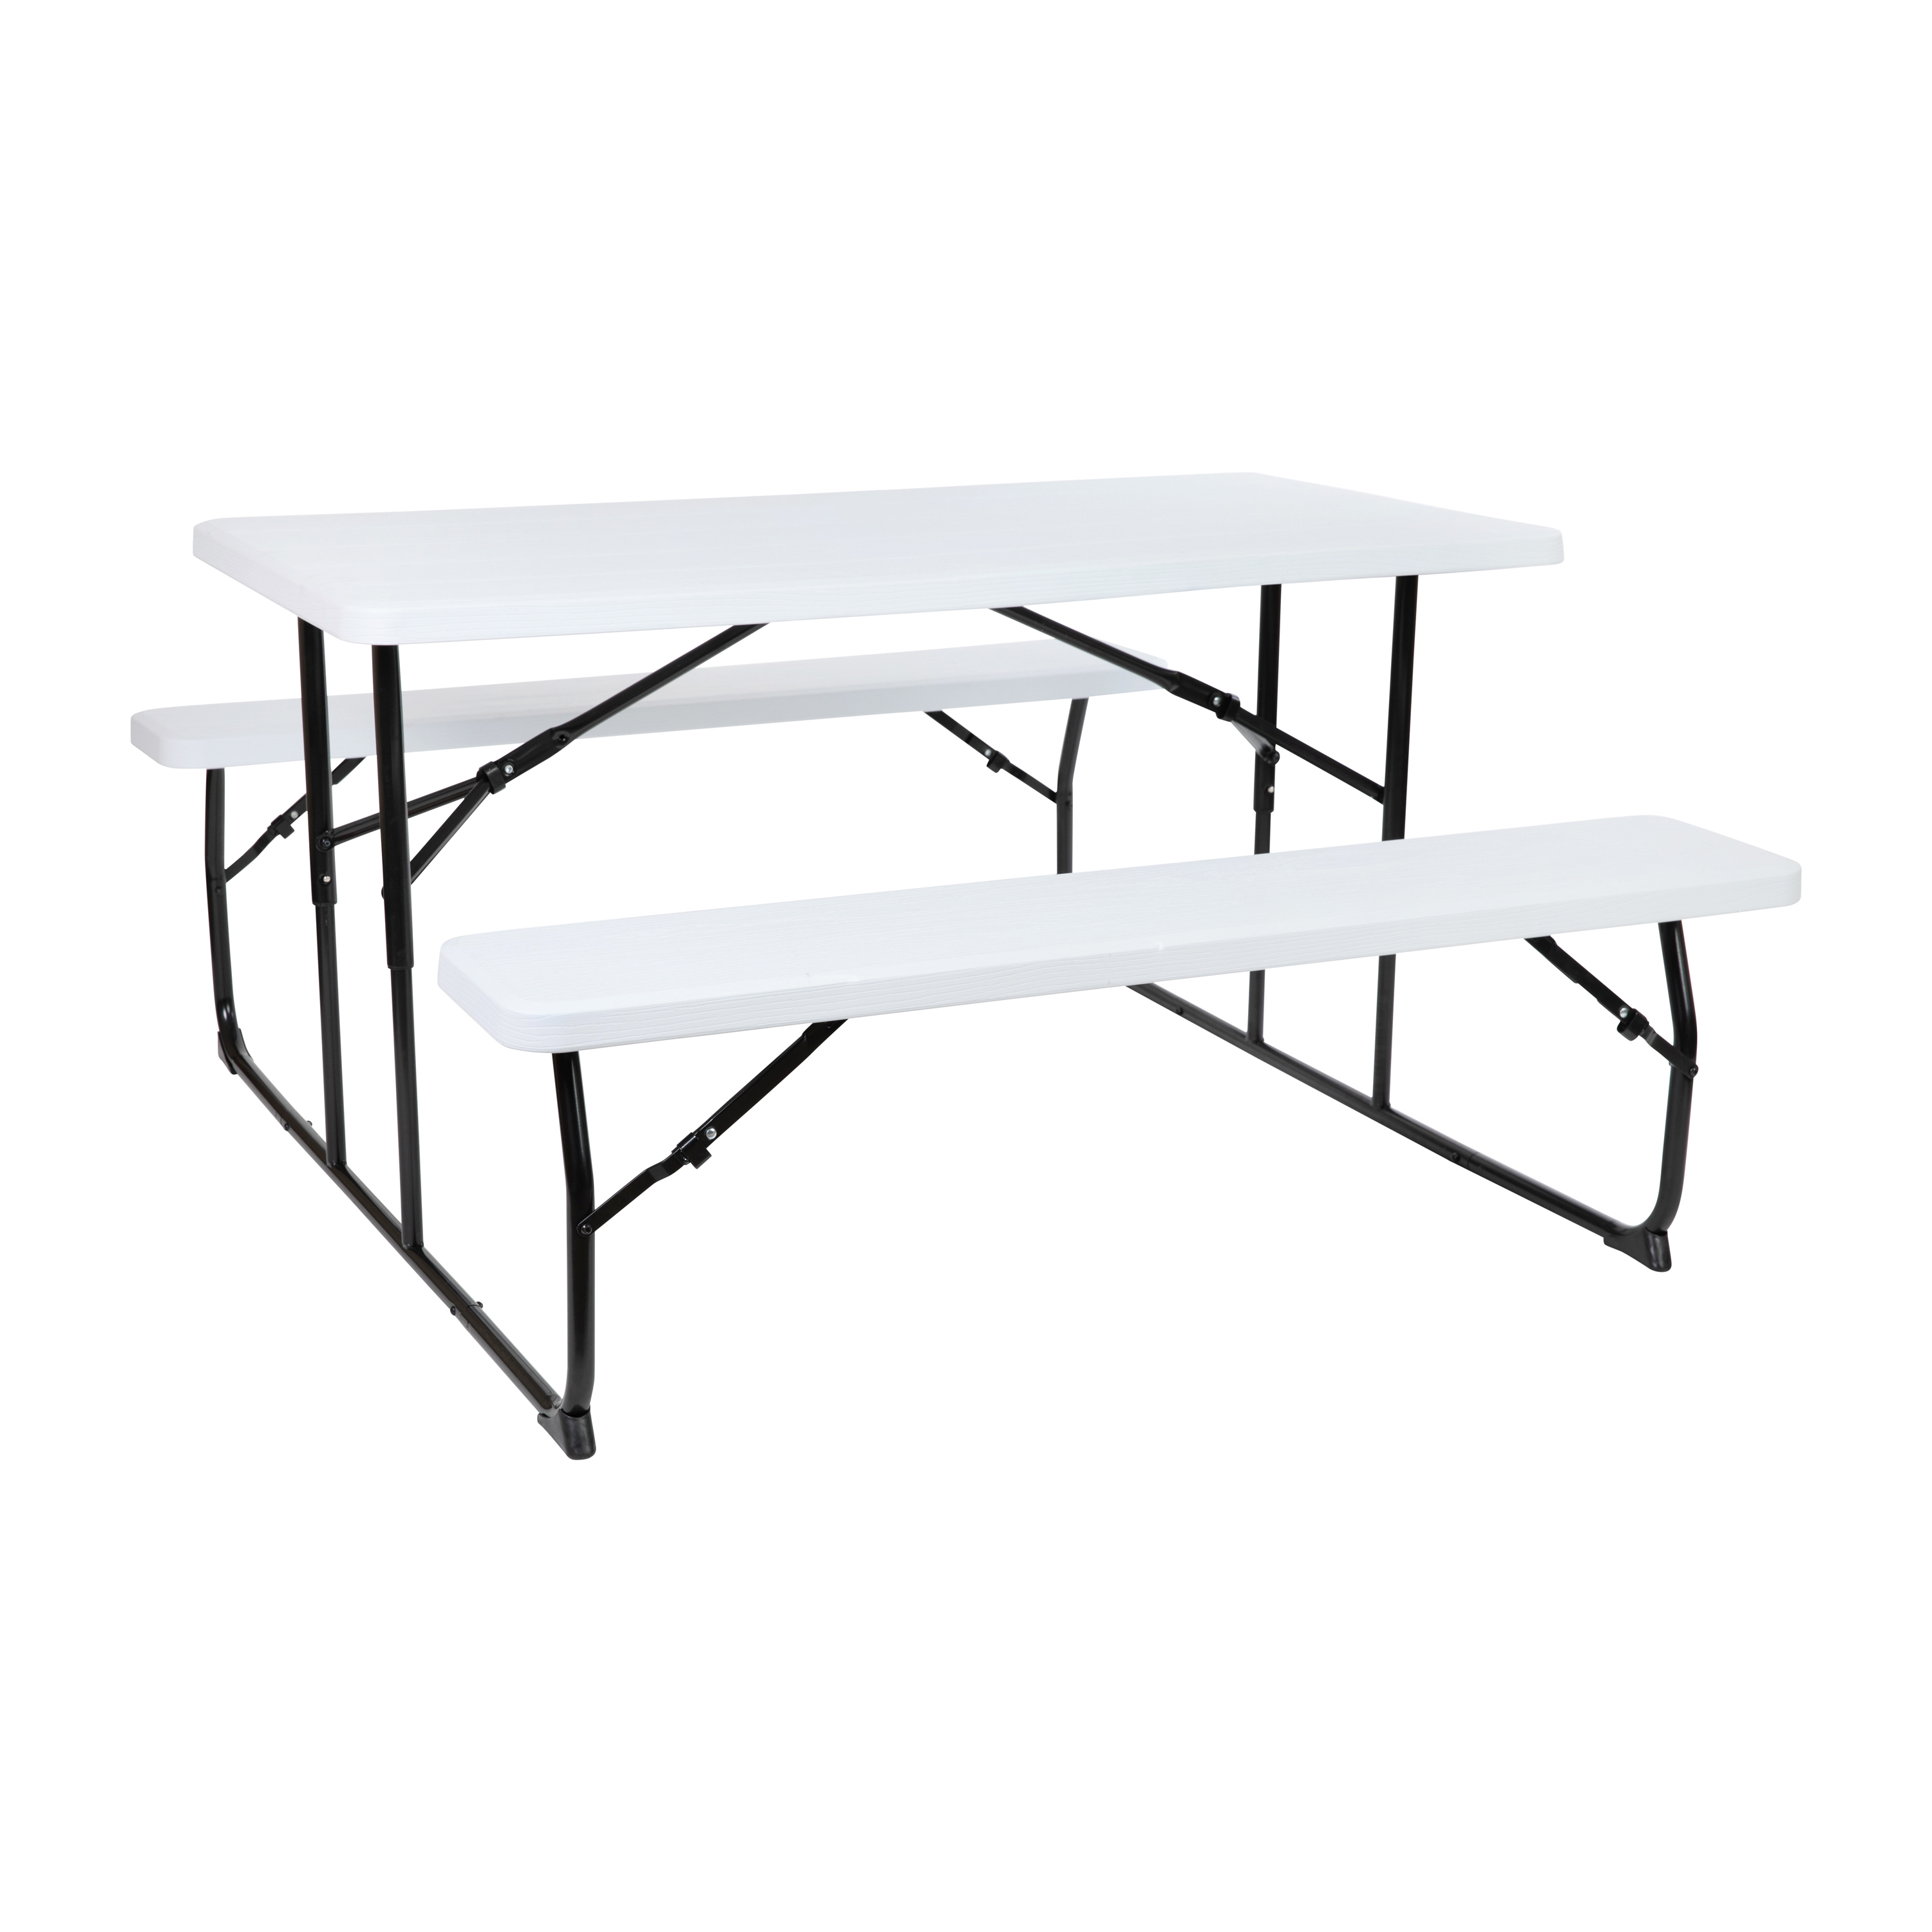 Flash Furniture RB-EBB-1470FD-WH-GG Insta-Fold White Wood Grain 4.5' Folding Picnic Table and Benches